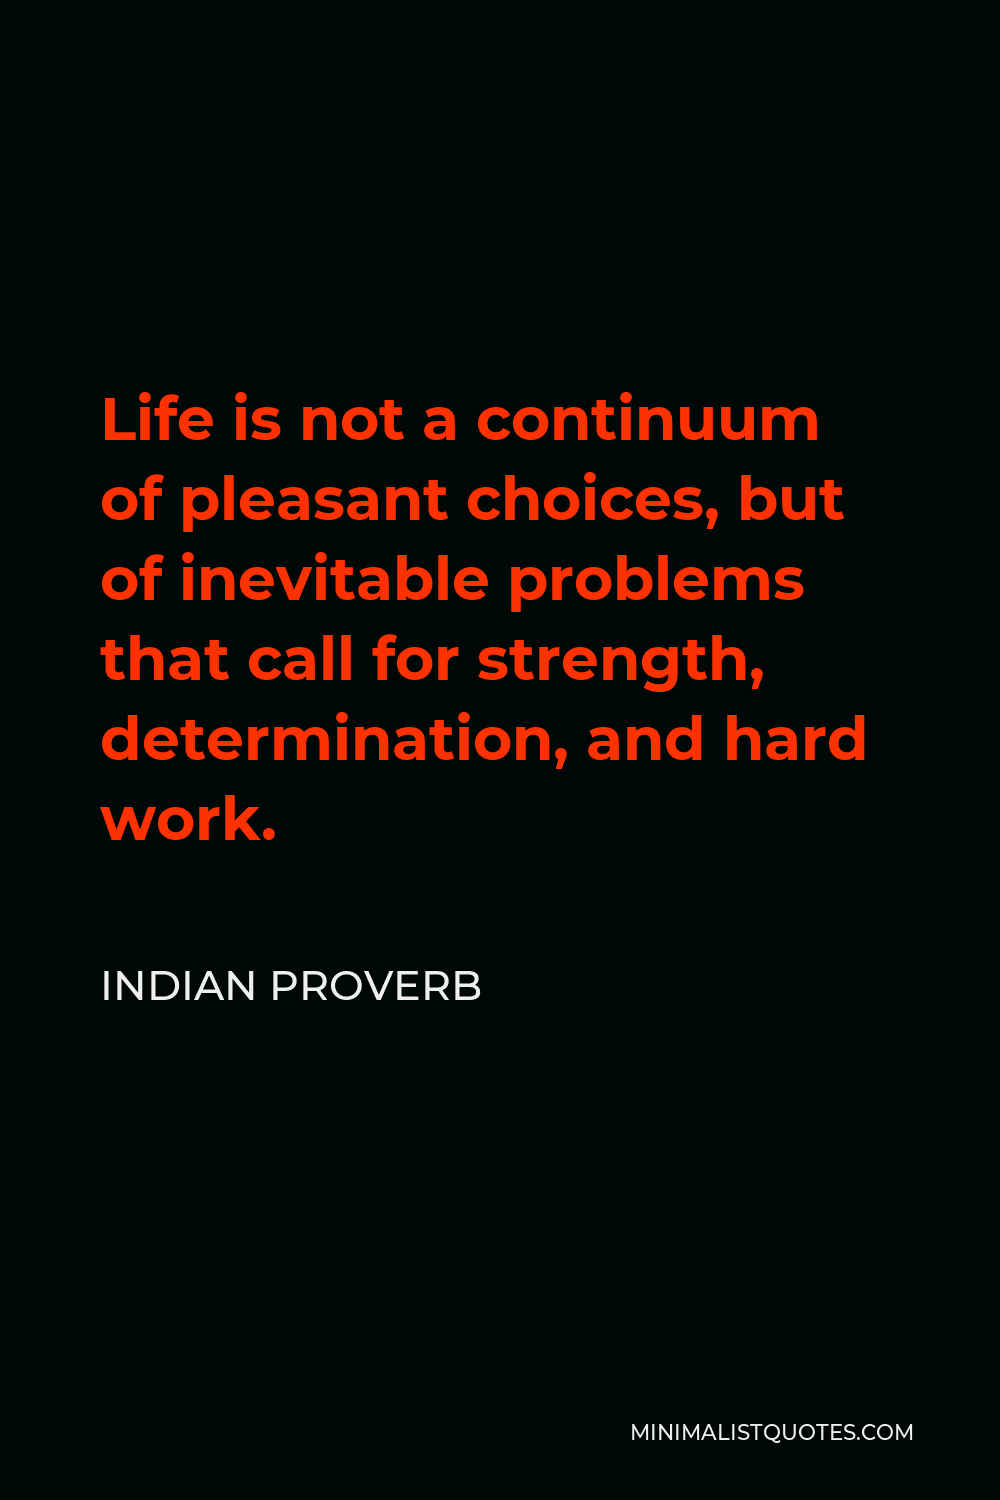 Indian Proverb Quote - Life is not a continuum of pleasant choices, but of inevitable problems that call for strength, determination, and hard work.